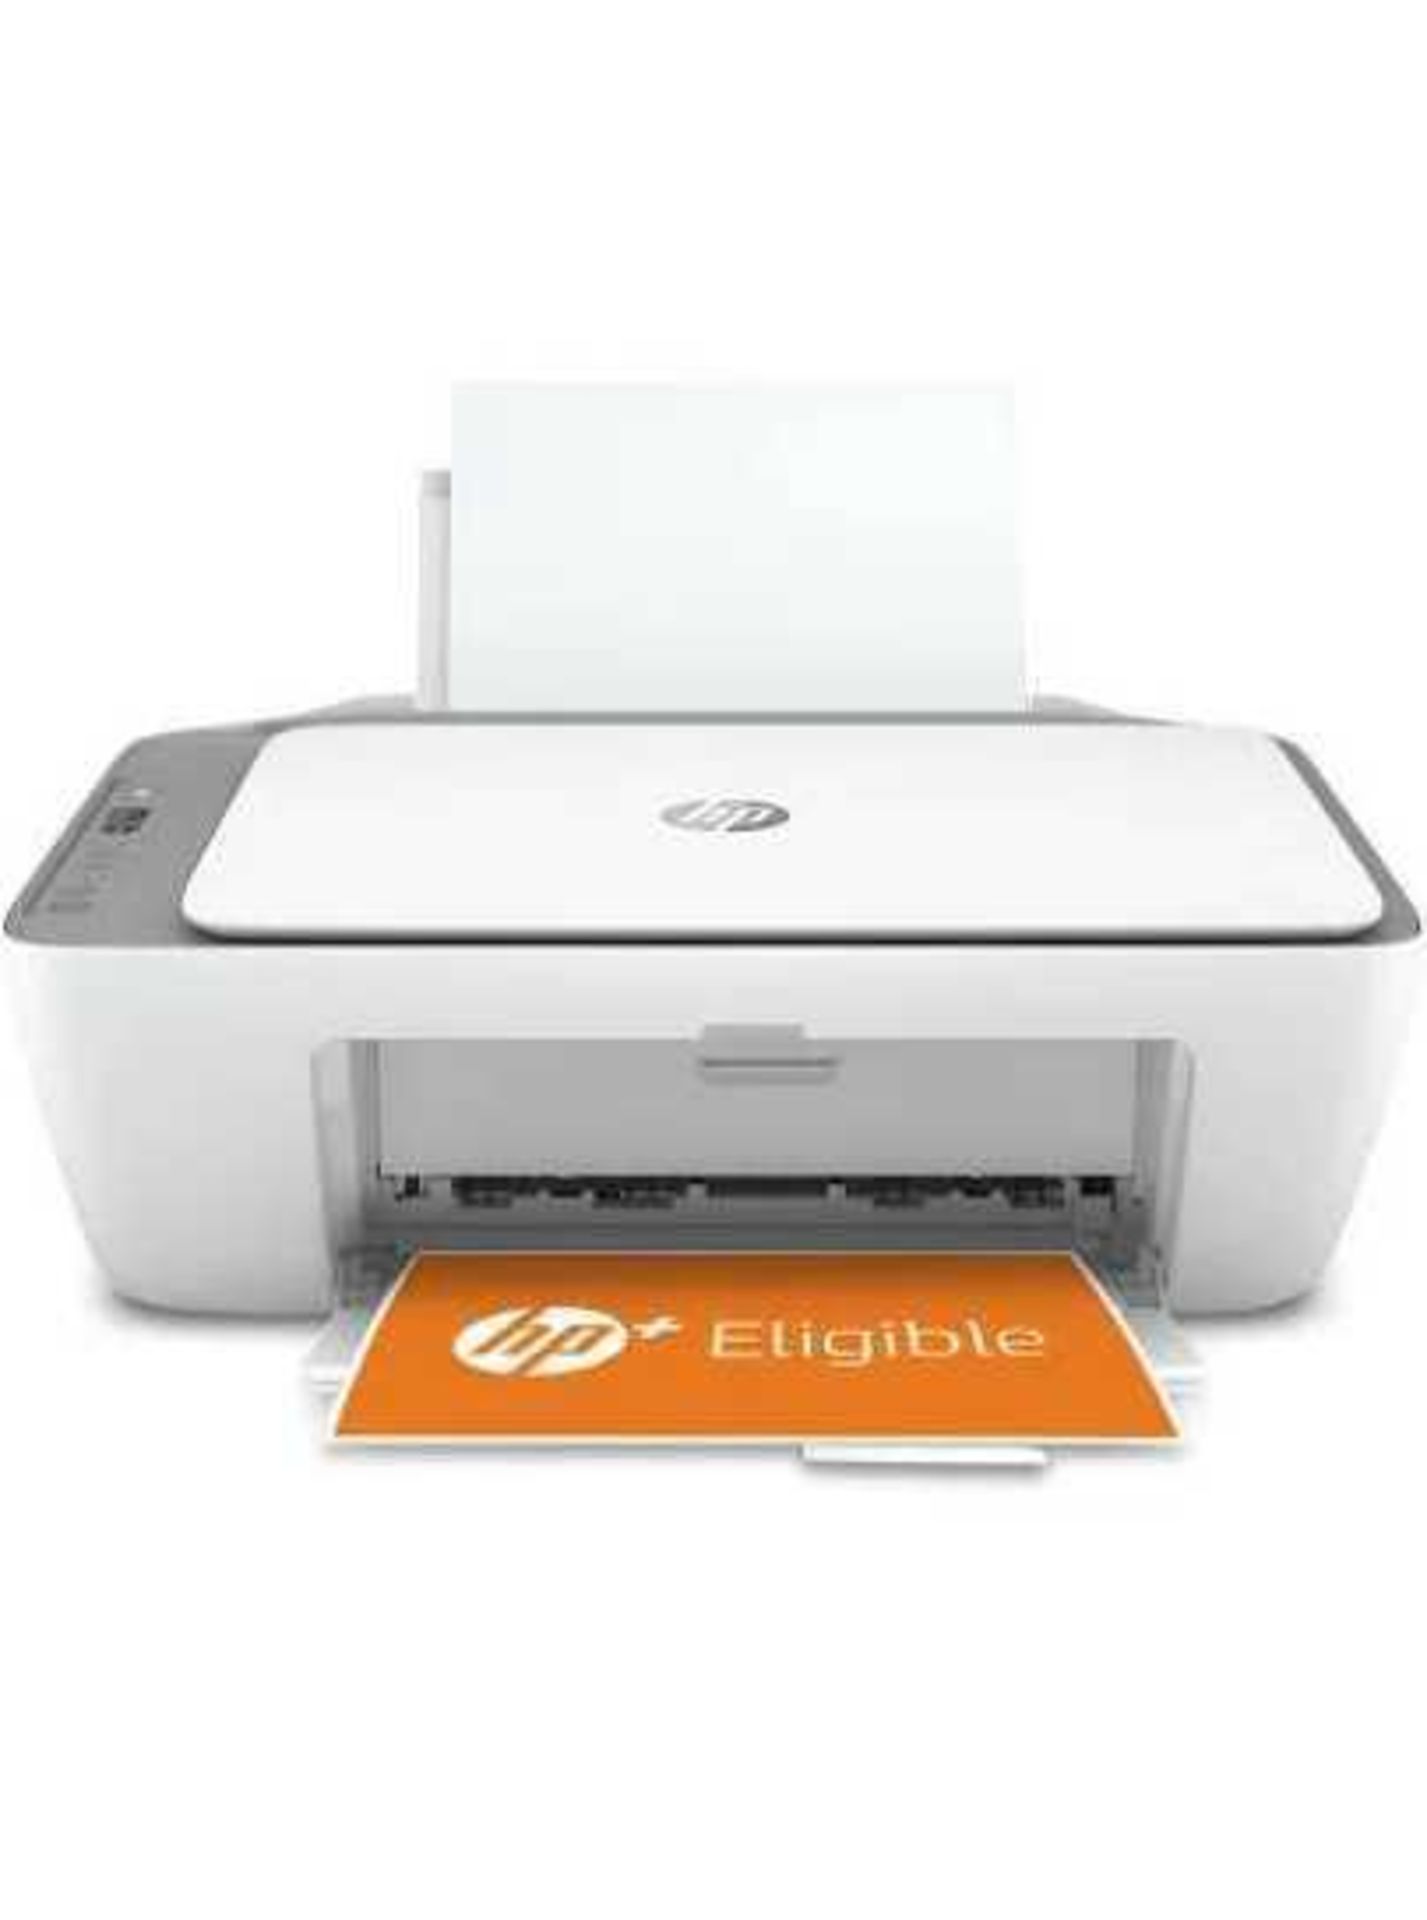 RRP £100, Hp Envy, 2720E, Printer, White, Boxed (Used) (T) (Condition Reports Available On